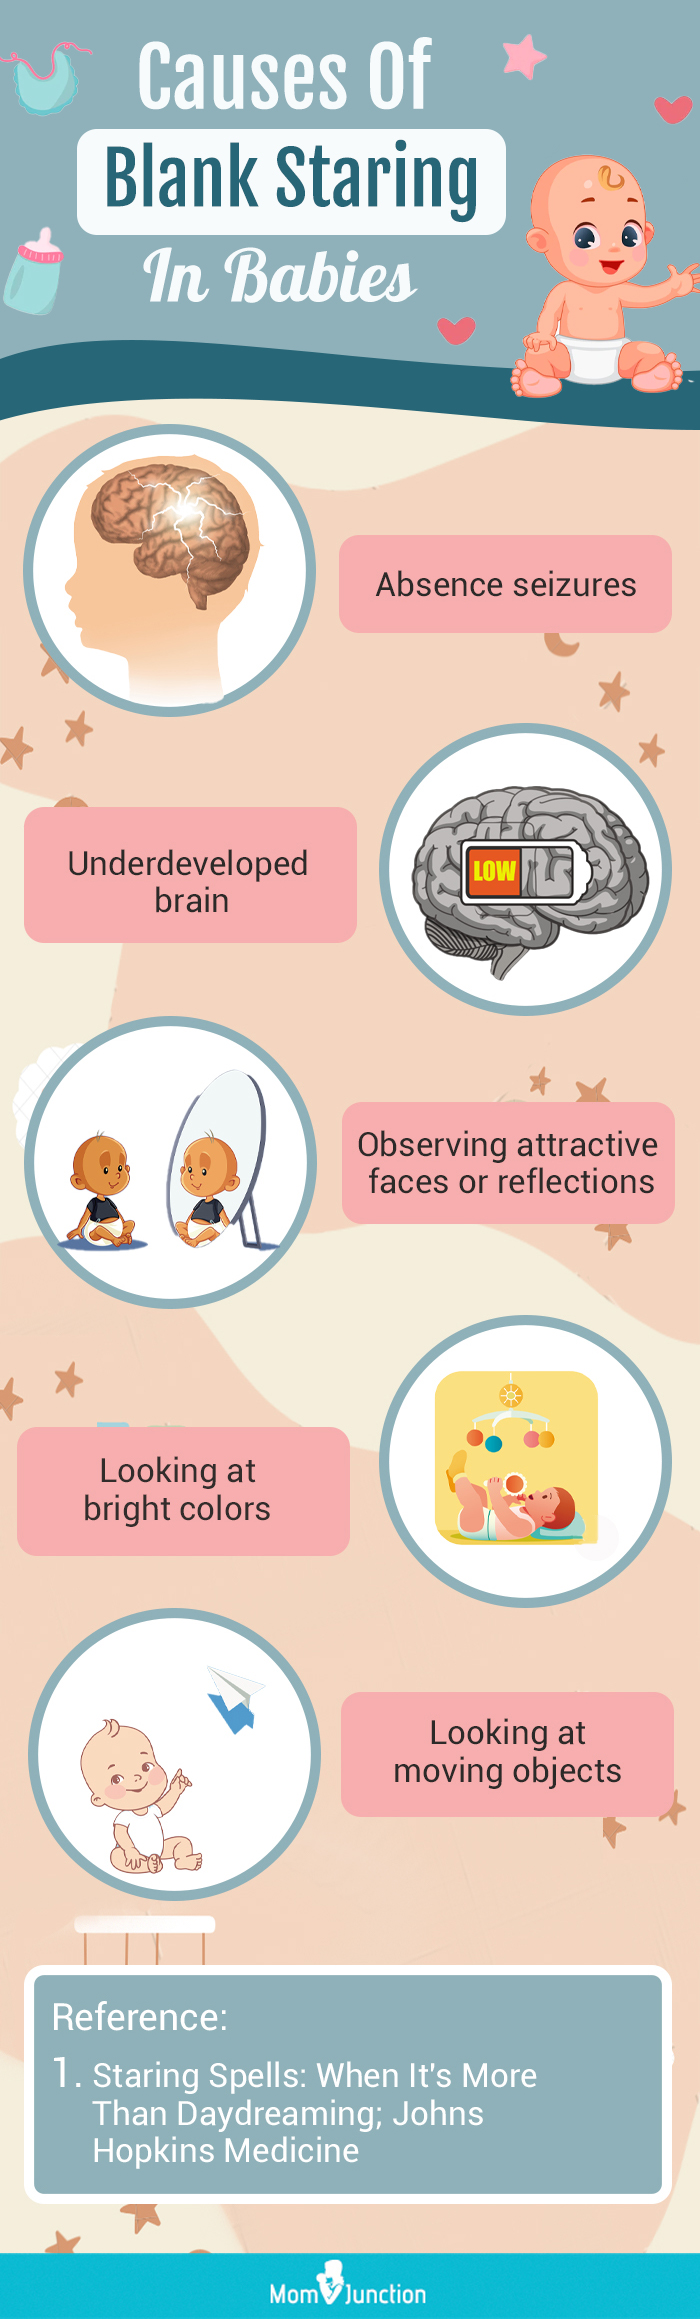 causes of balank staring in babies [infographic]